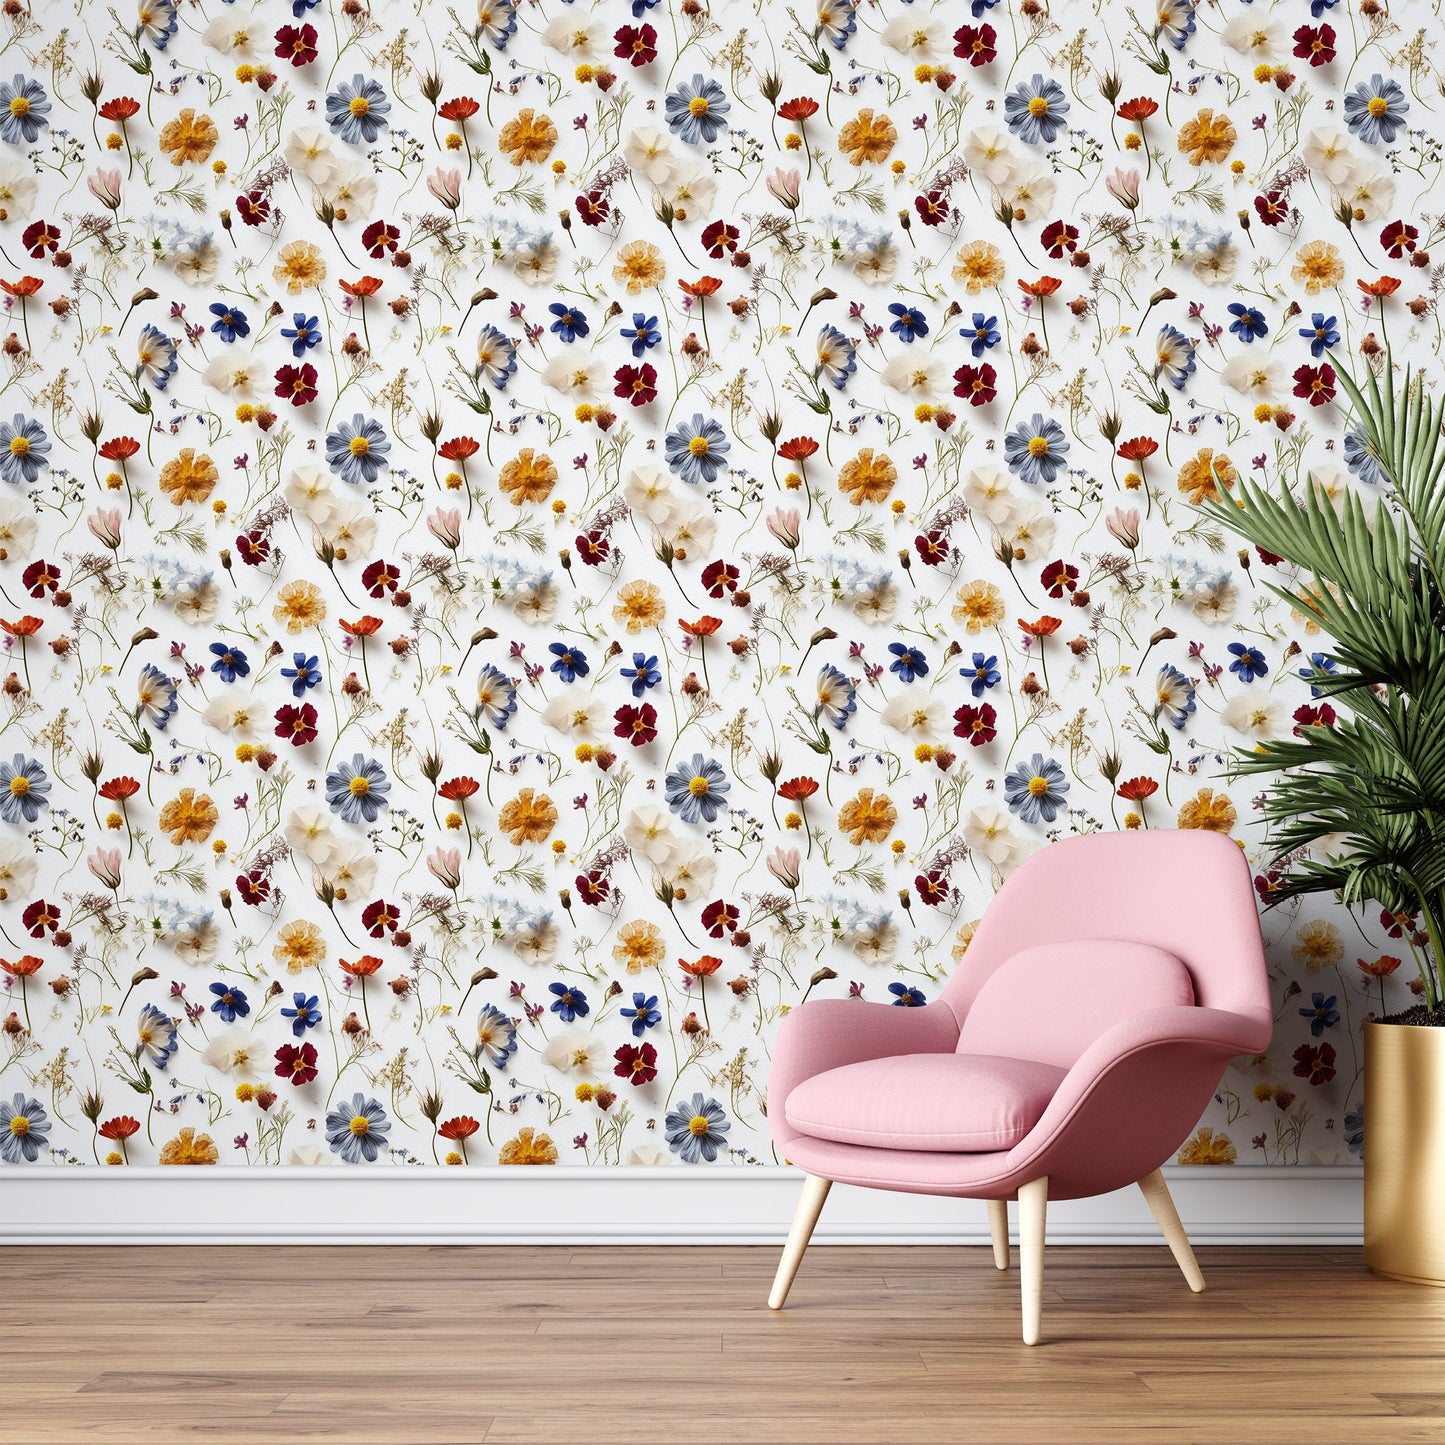 Pressed Floral Wallpaper | White Floral Removable Wallpaper | Botanic Flower Wallpaper | Peel and Stick Wildflower Wallpaper, Self Adhesive